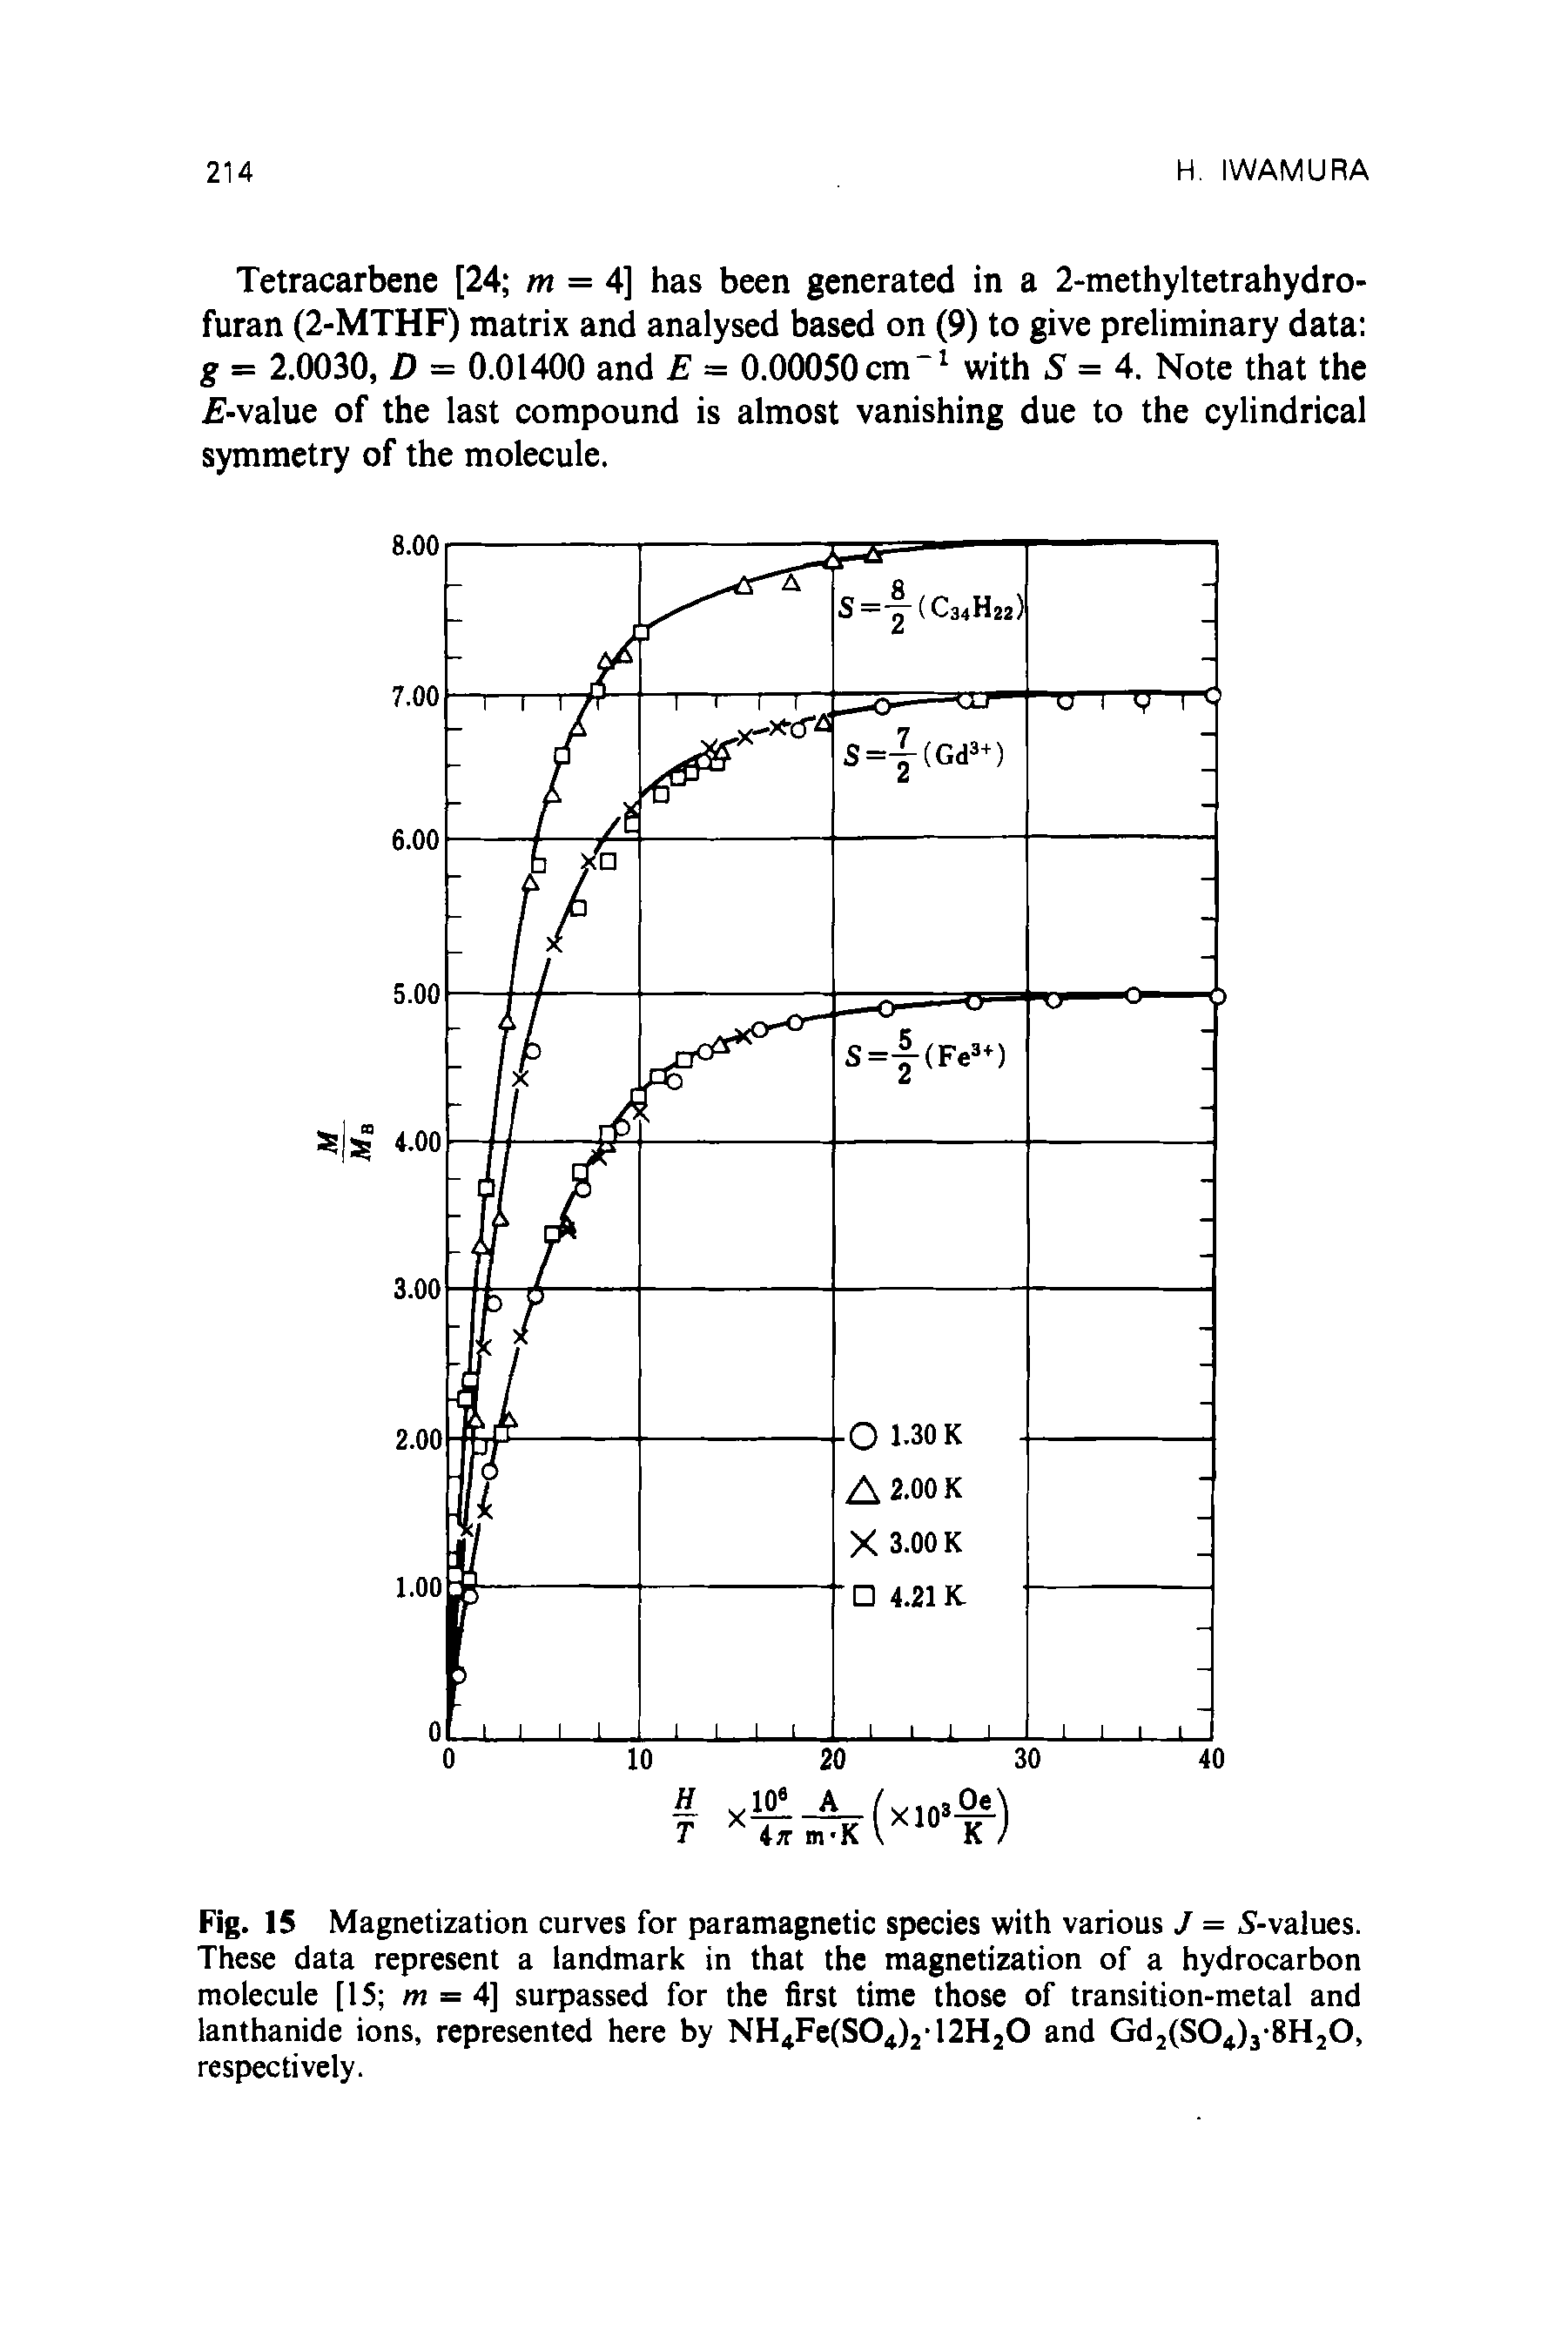 Fig. 15 Magnetization curves for paramagnetic species with various J = 5-values. These data represent a landmark in that the magnetization of a hydrocarbon molecule [15 m = 4] surpassed for the first time those of transition-metal and lanthanide ions, represented here by NH4Fe(S04)2-12Hj0 and Gd2(S04)3-8H20, respectively.